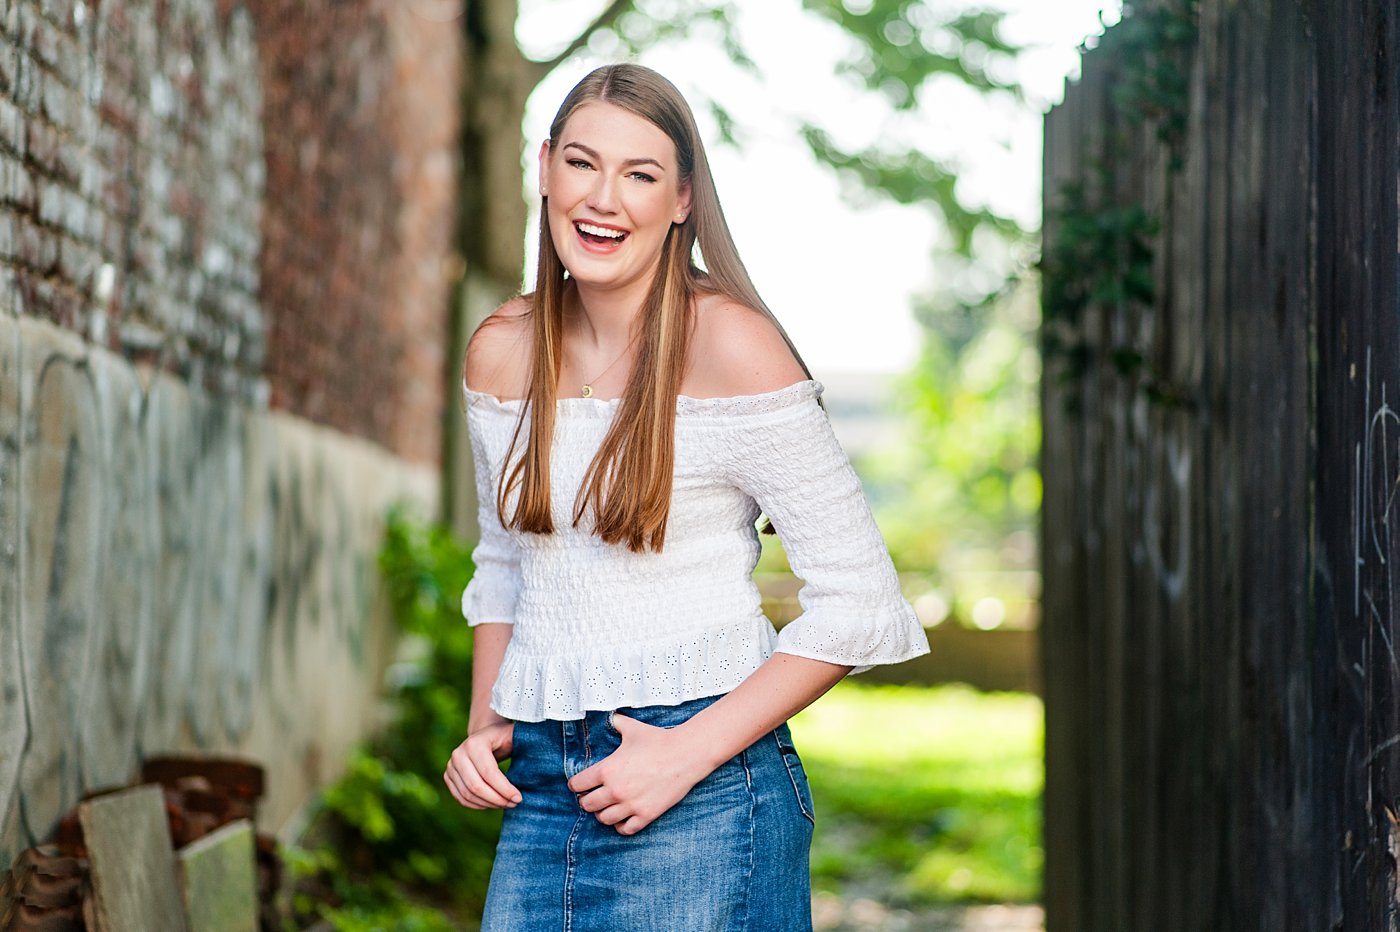 senior picture poses- think happy thoughts, arms away from body, body on angle toward camera - by amber kay senior photography